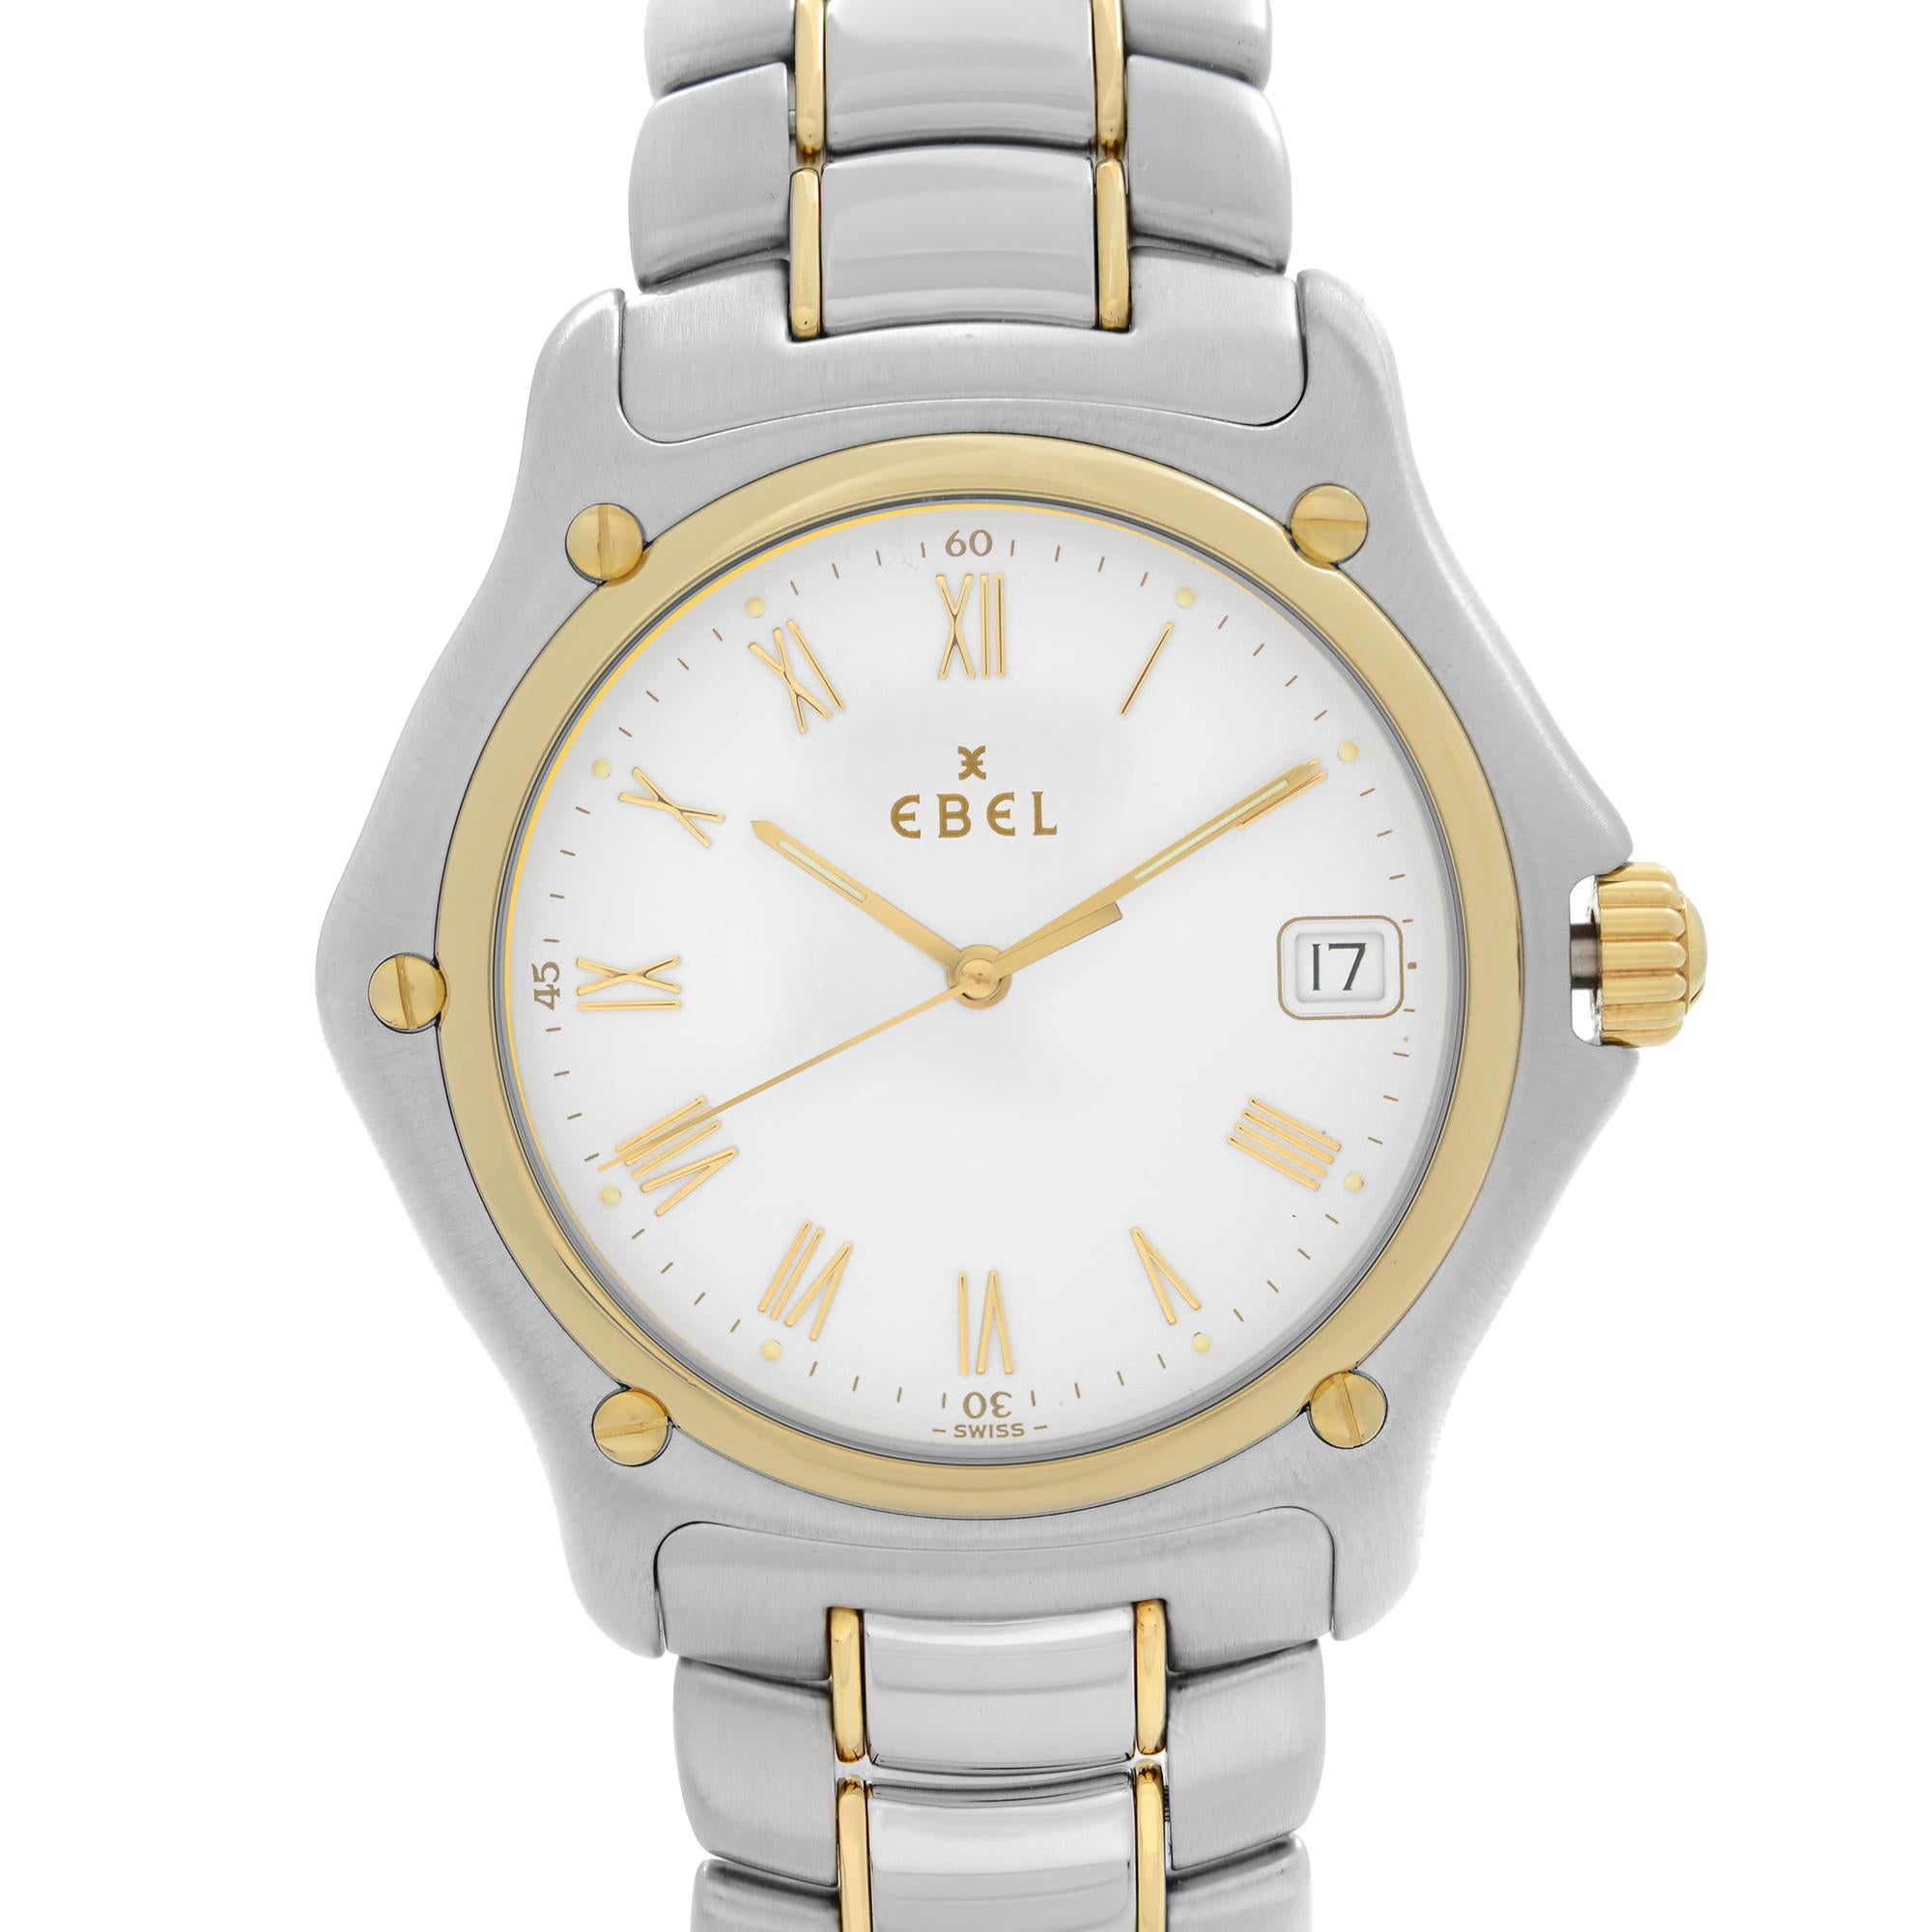 Pre Owned Ebel 1911 18k Yellow Gold Stainless Steel White Dial Quartz Mens Watch 1187916. The Watch has Minor Blemishes on the Dial around 12 Hour Marker. This Beautiful Timepiece is Powered by Quartz (Battery) Movement And Features: Round Stainless